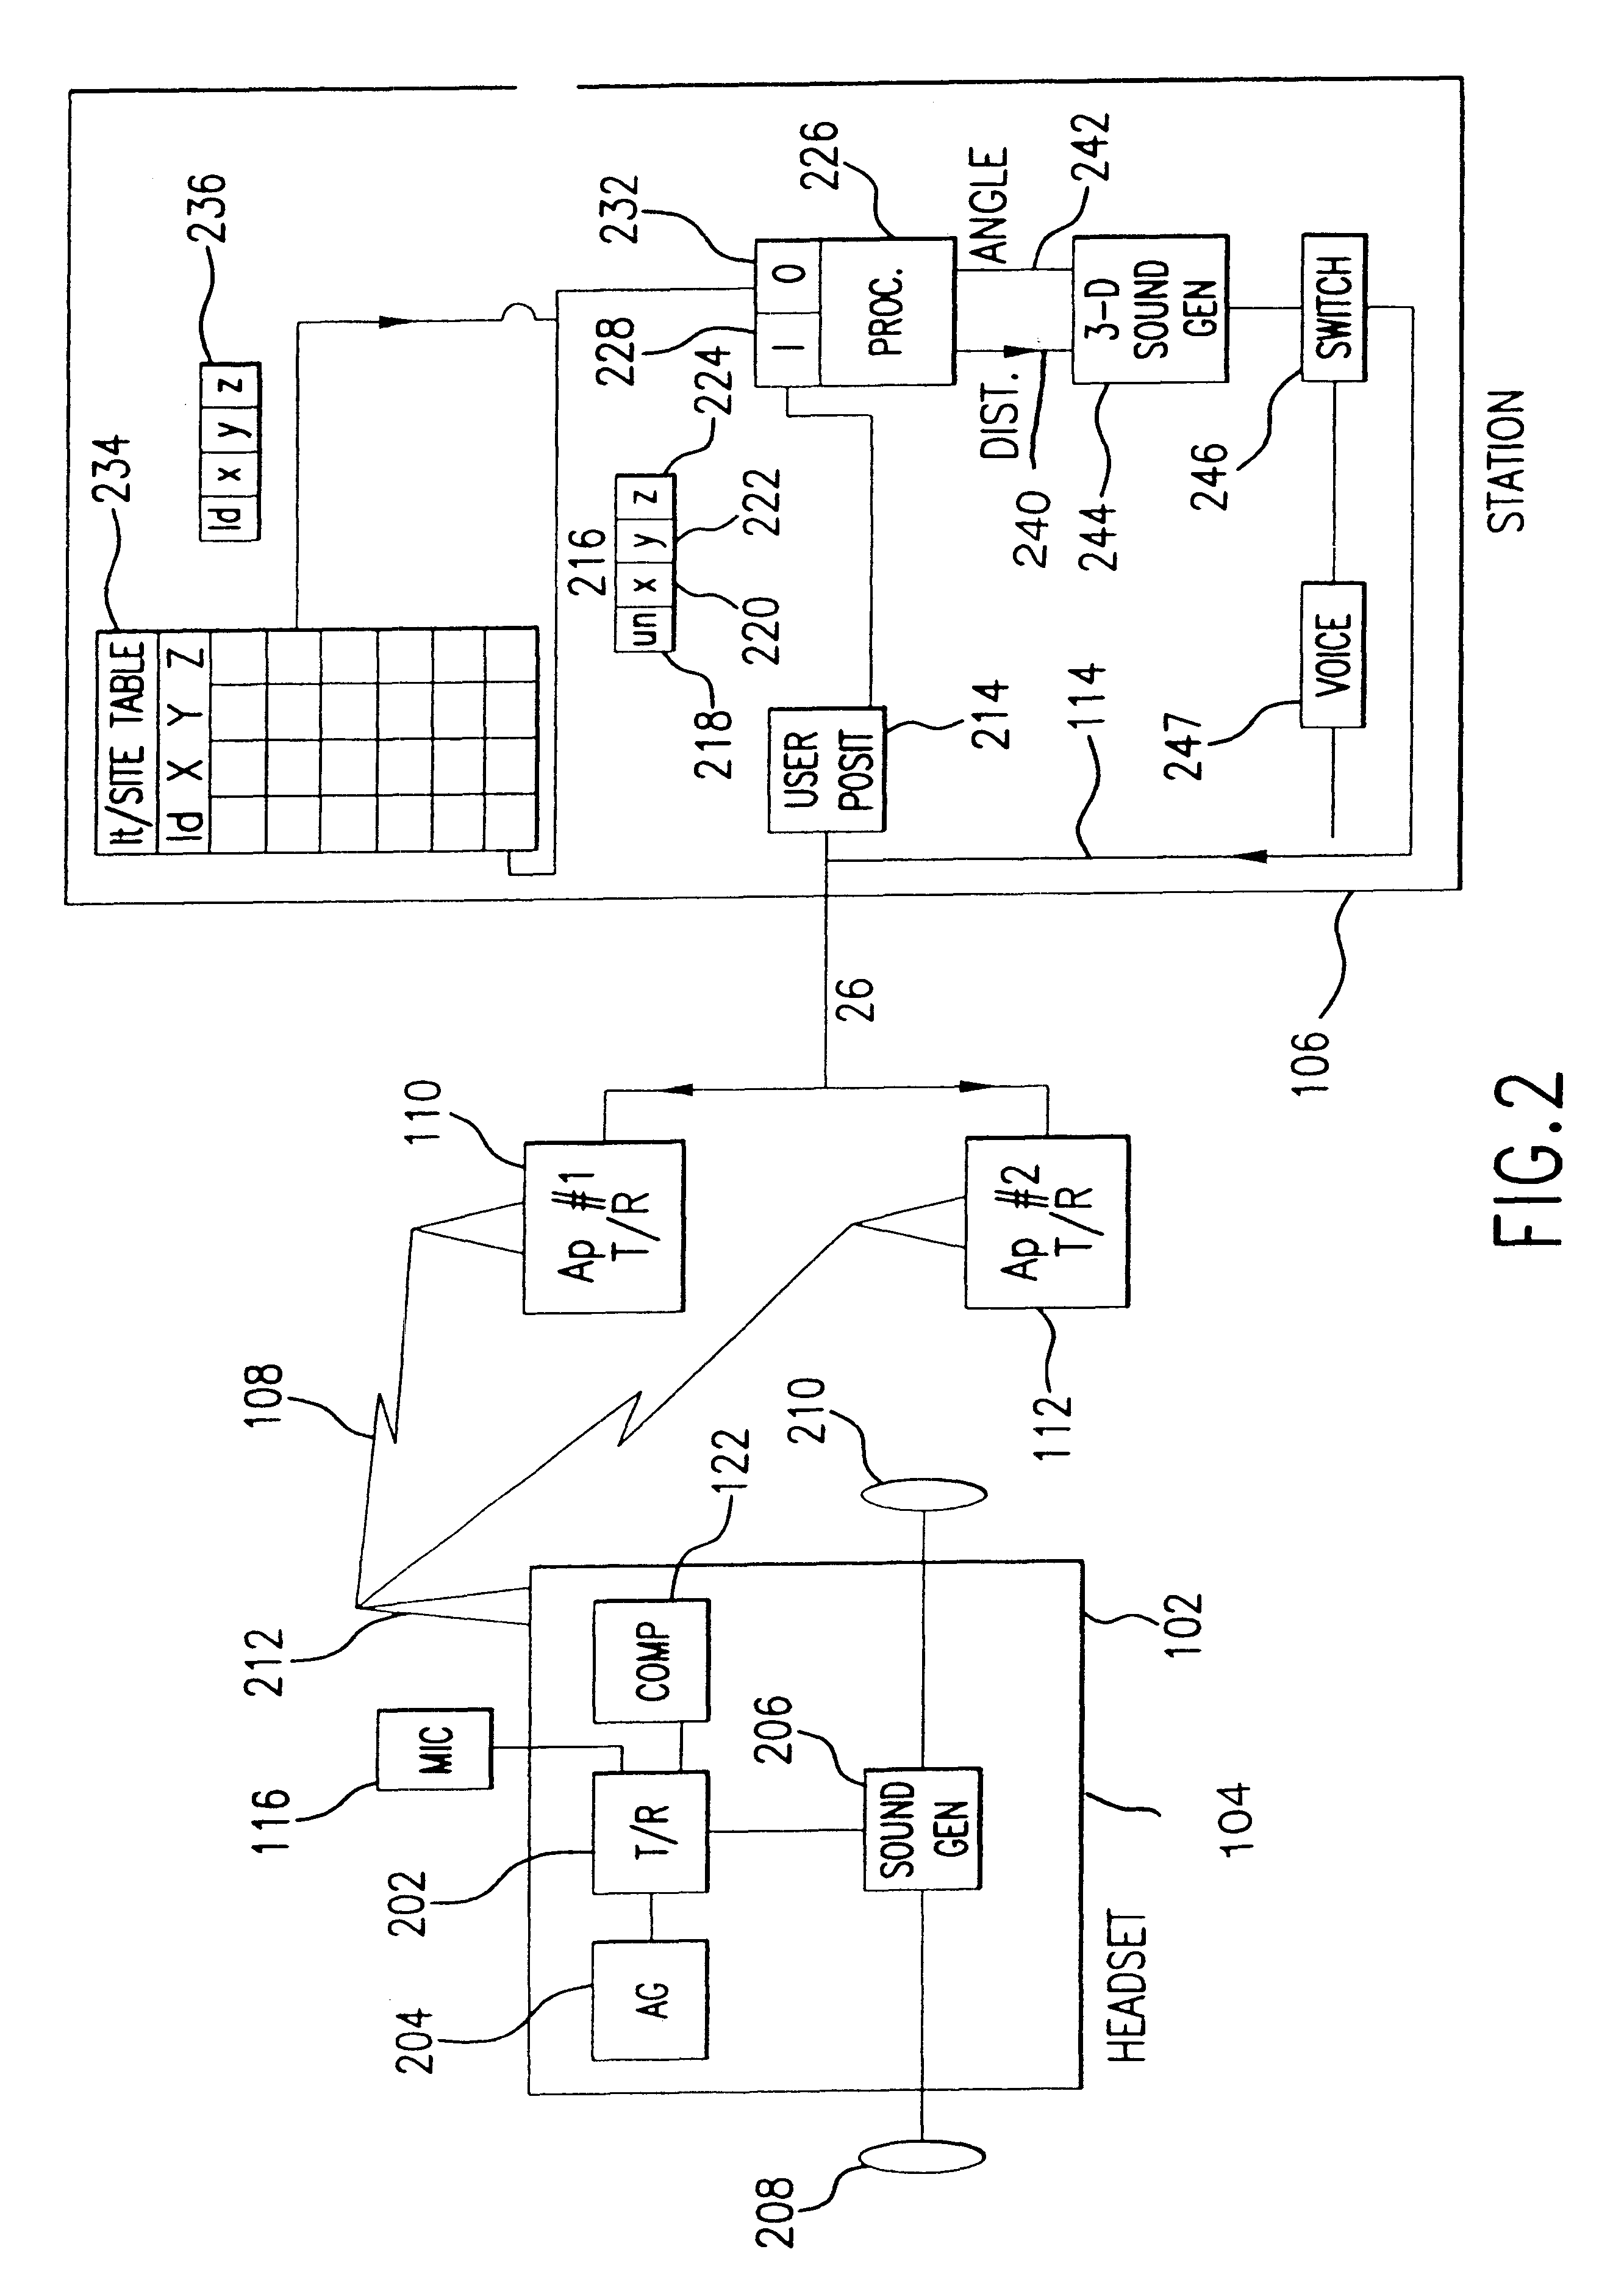 Three dimensional (3-D) object locator system for items or sites using an intuitive sound beacon: system and method of operation